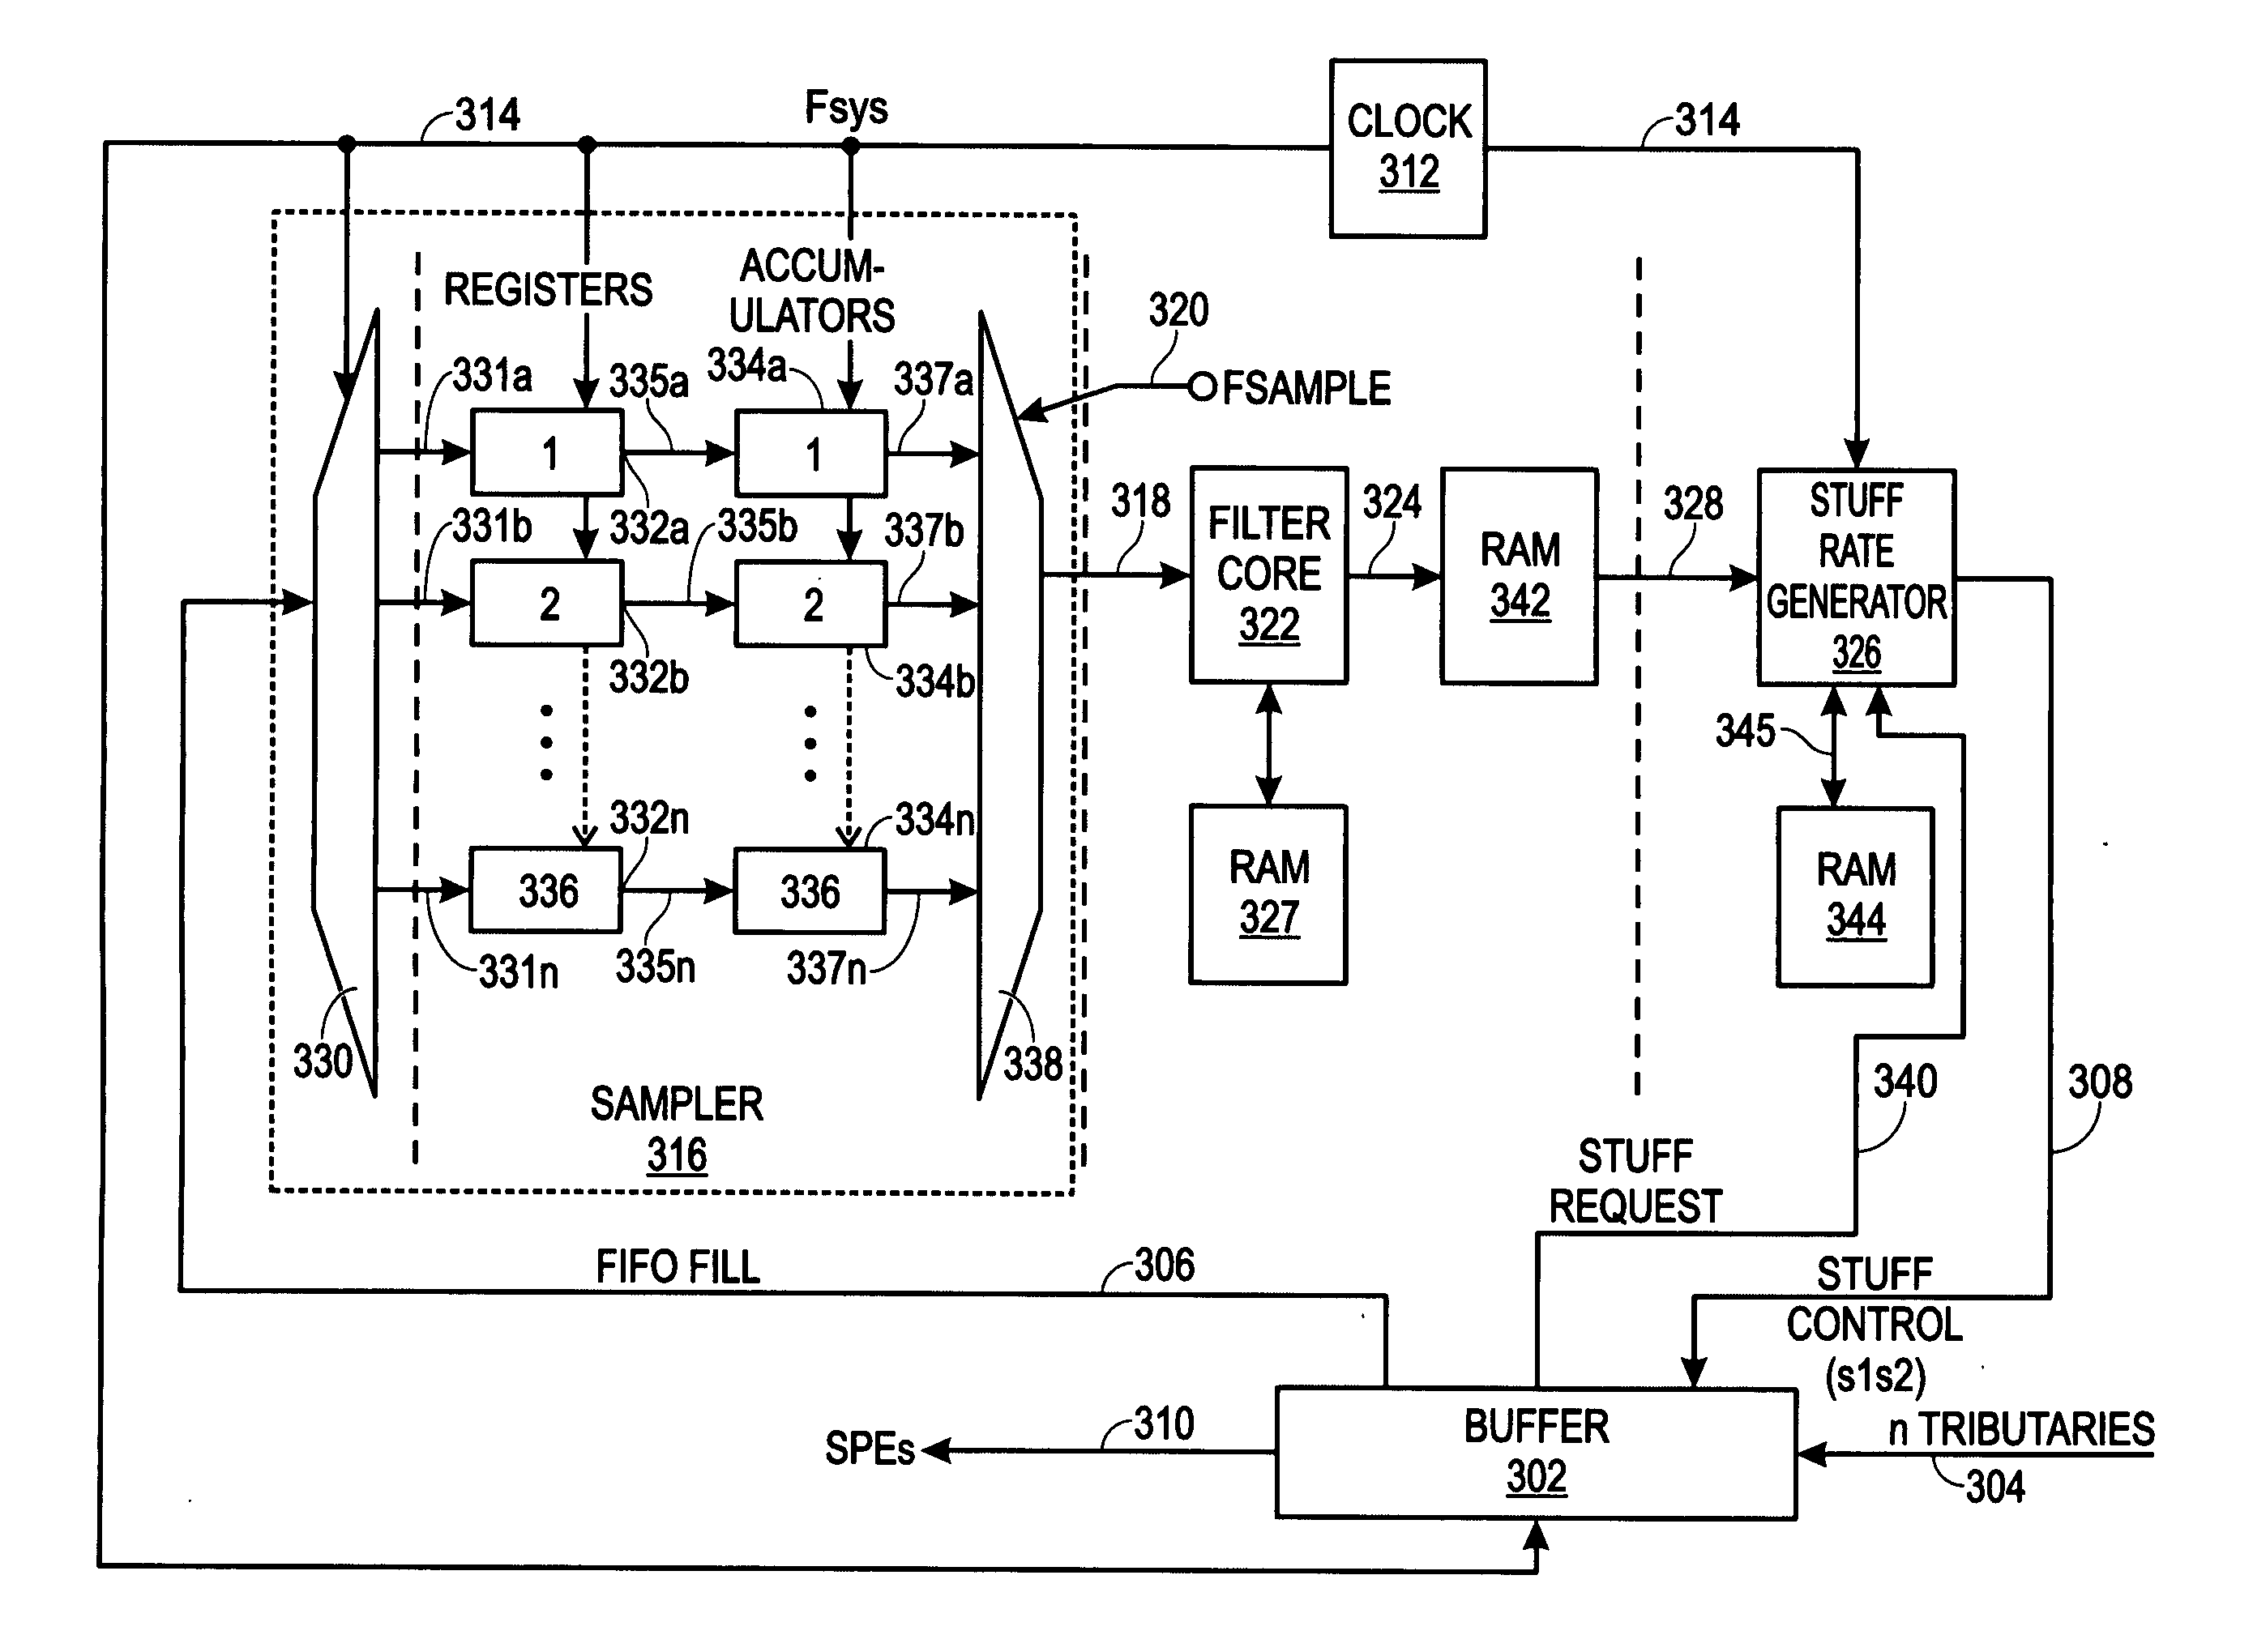 Timeshared jitter attenuator in multi-channel mapping applications